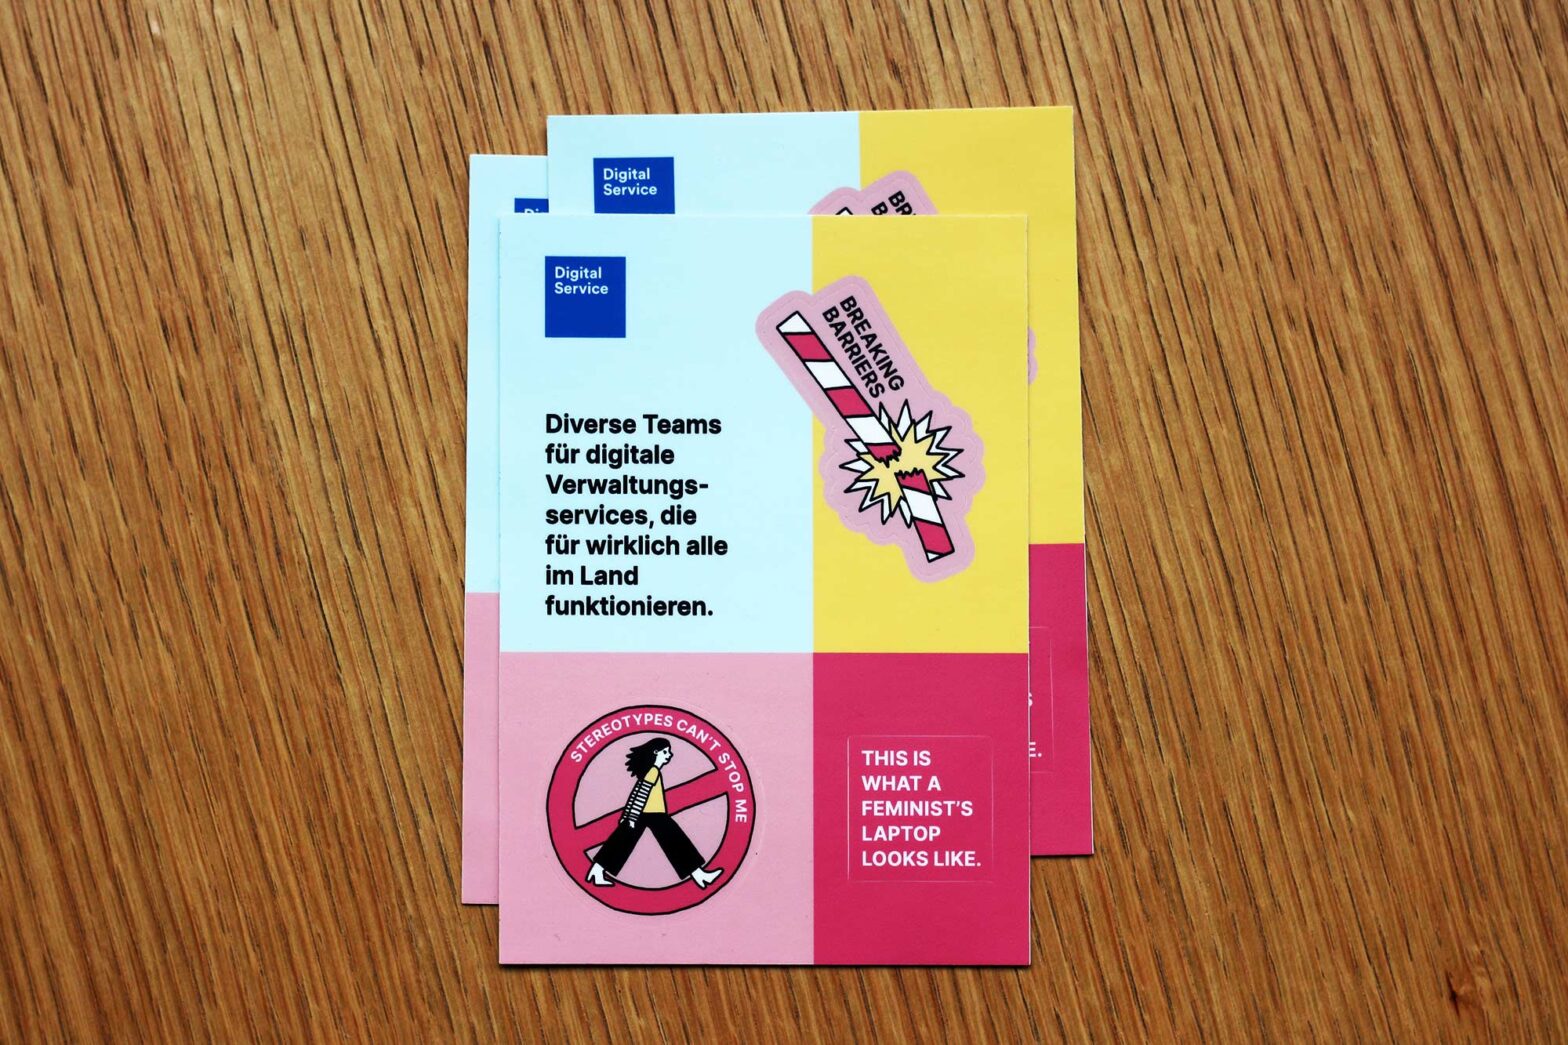 A little pile of sticker sheets with 3 colourful stickers: 1 says “breaking barriers” and shows a barrier being broken, another sticker says “stereotypes can’t stop me” and shows a hand-drawn person with longer hair passing a ‘no entry’ sign, and a third sticker saying “this is what a feminist’s laptop looks like” in all capital letters.